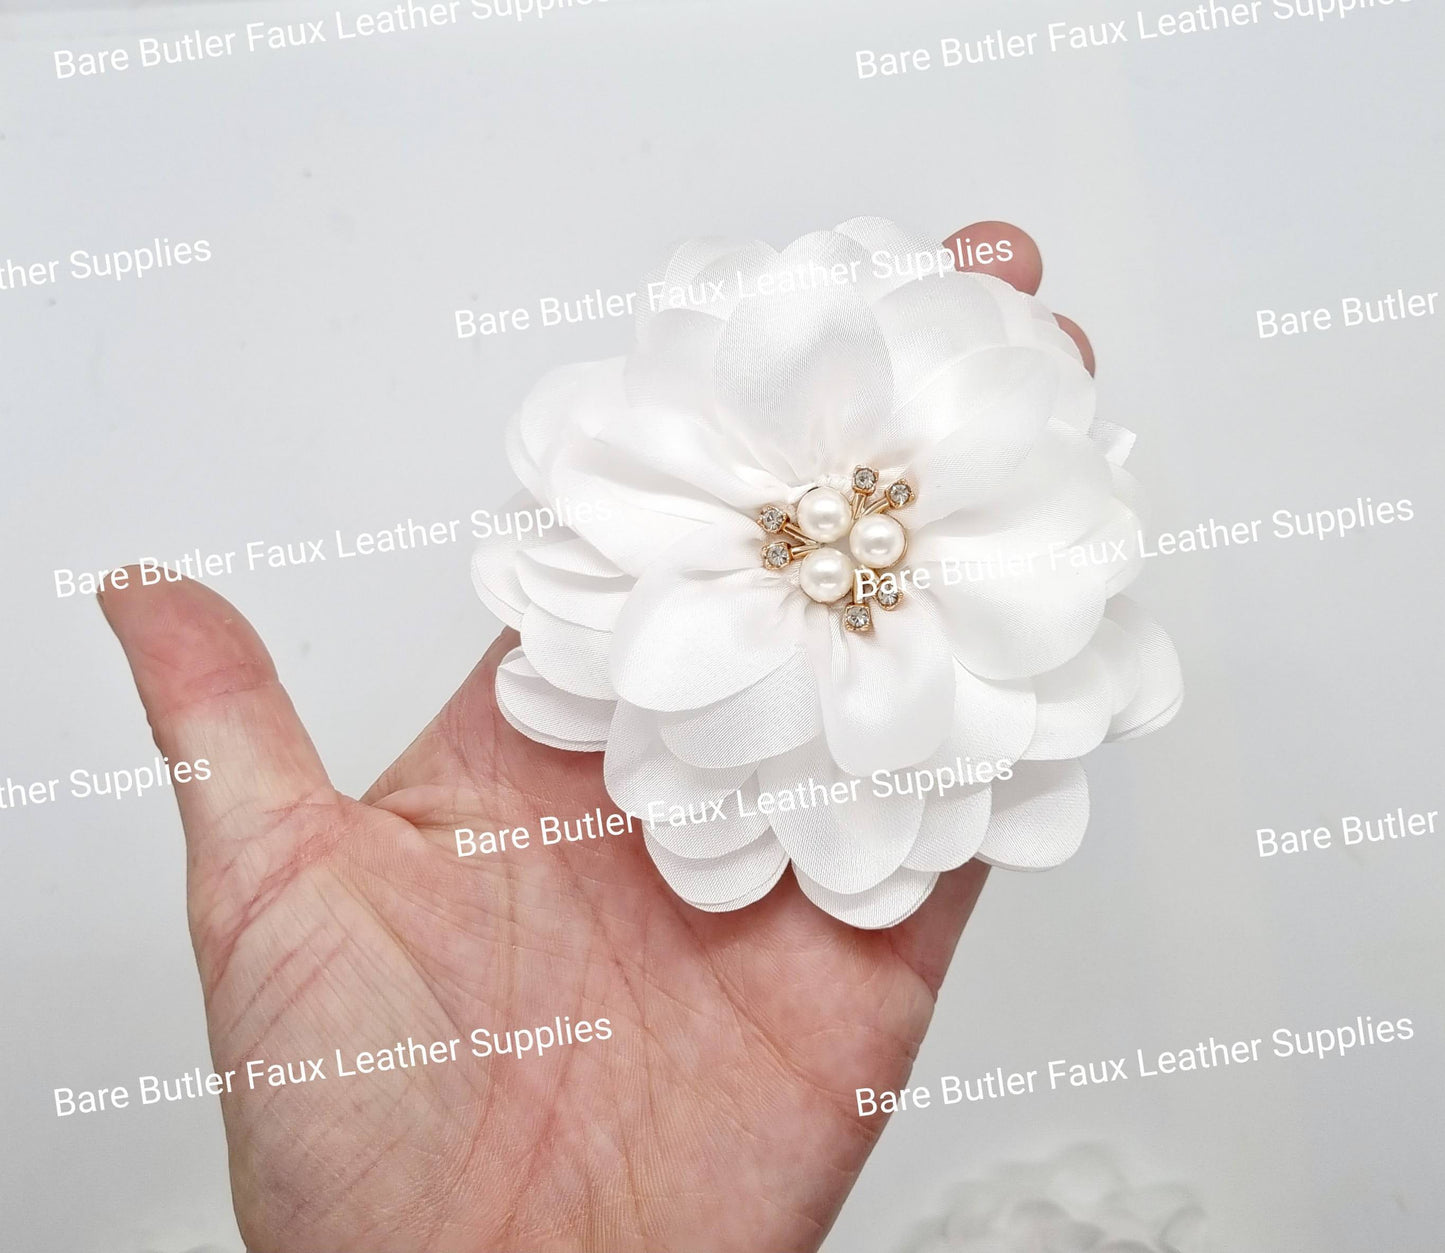 Chiffon Flower with Rhinestone center - White - Bare Butler Faux Leather Supplies 